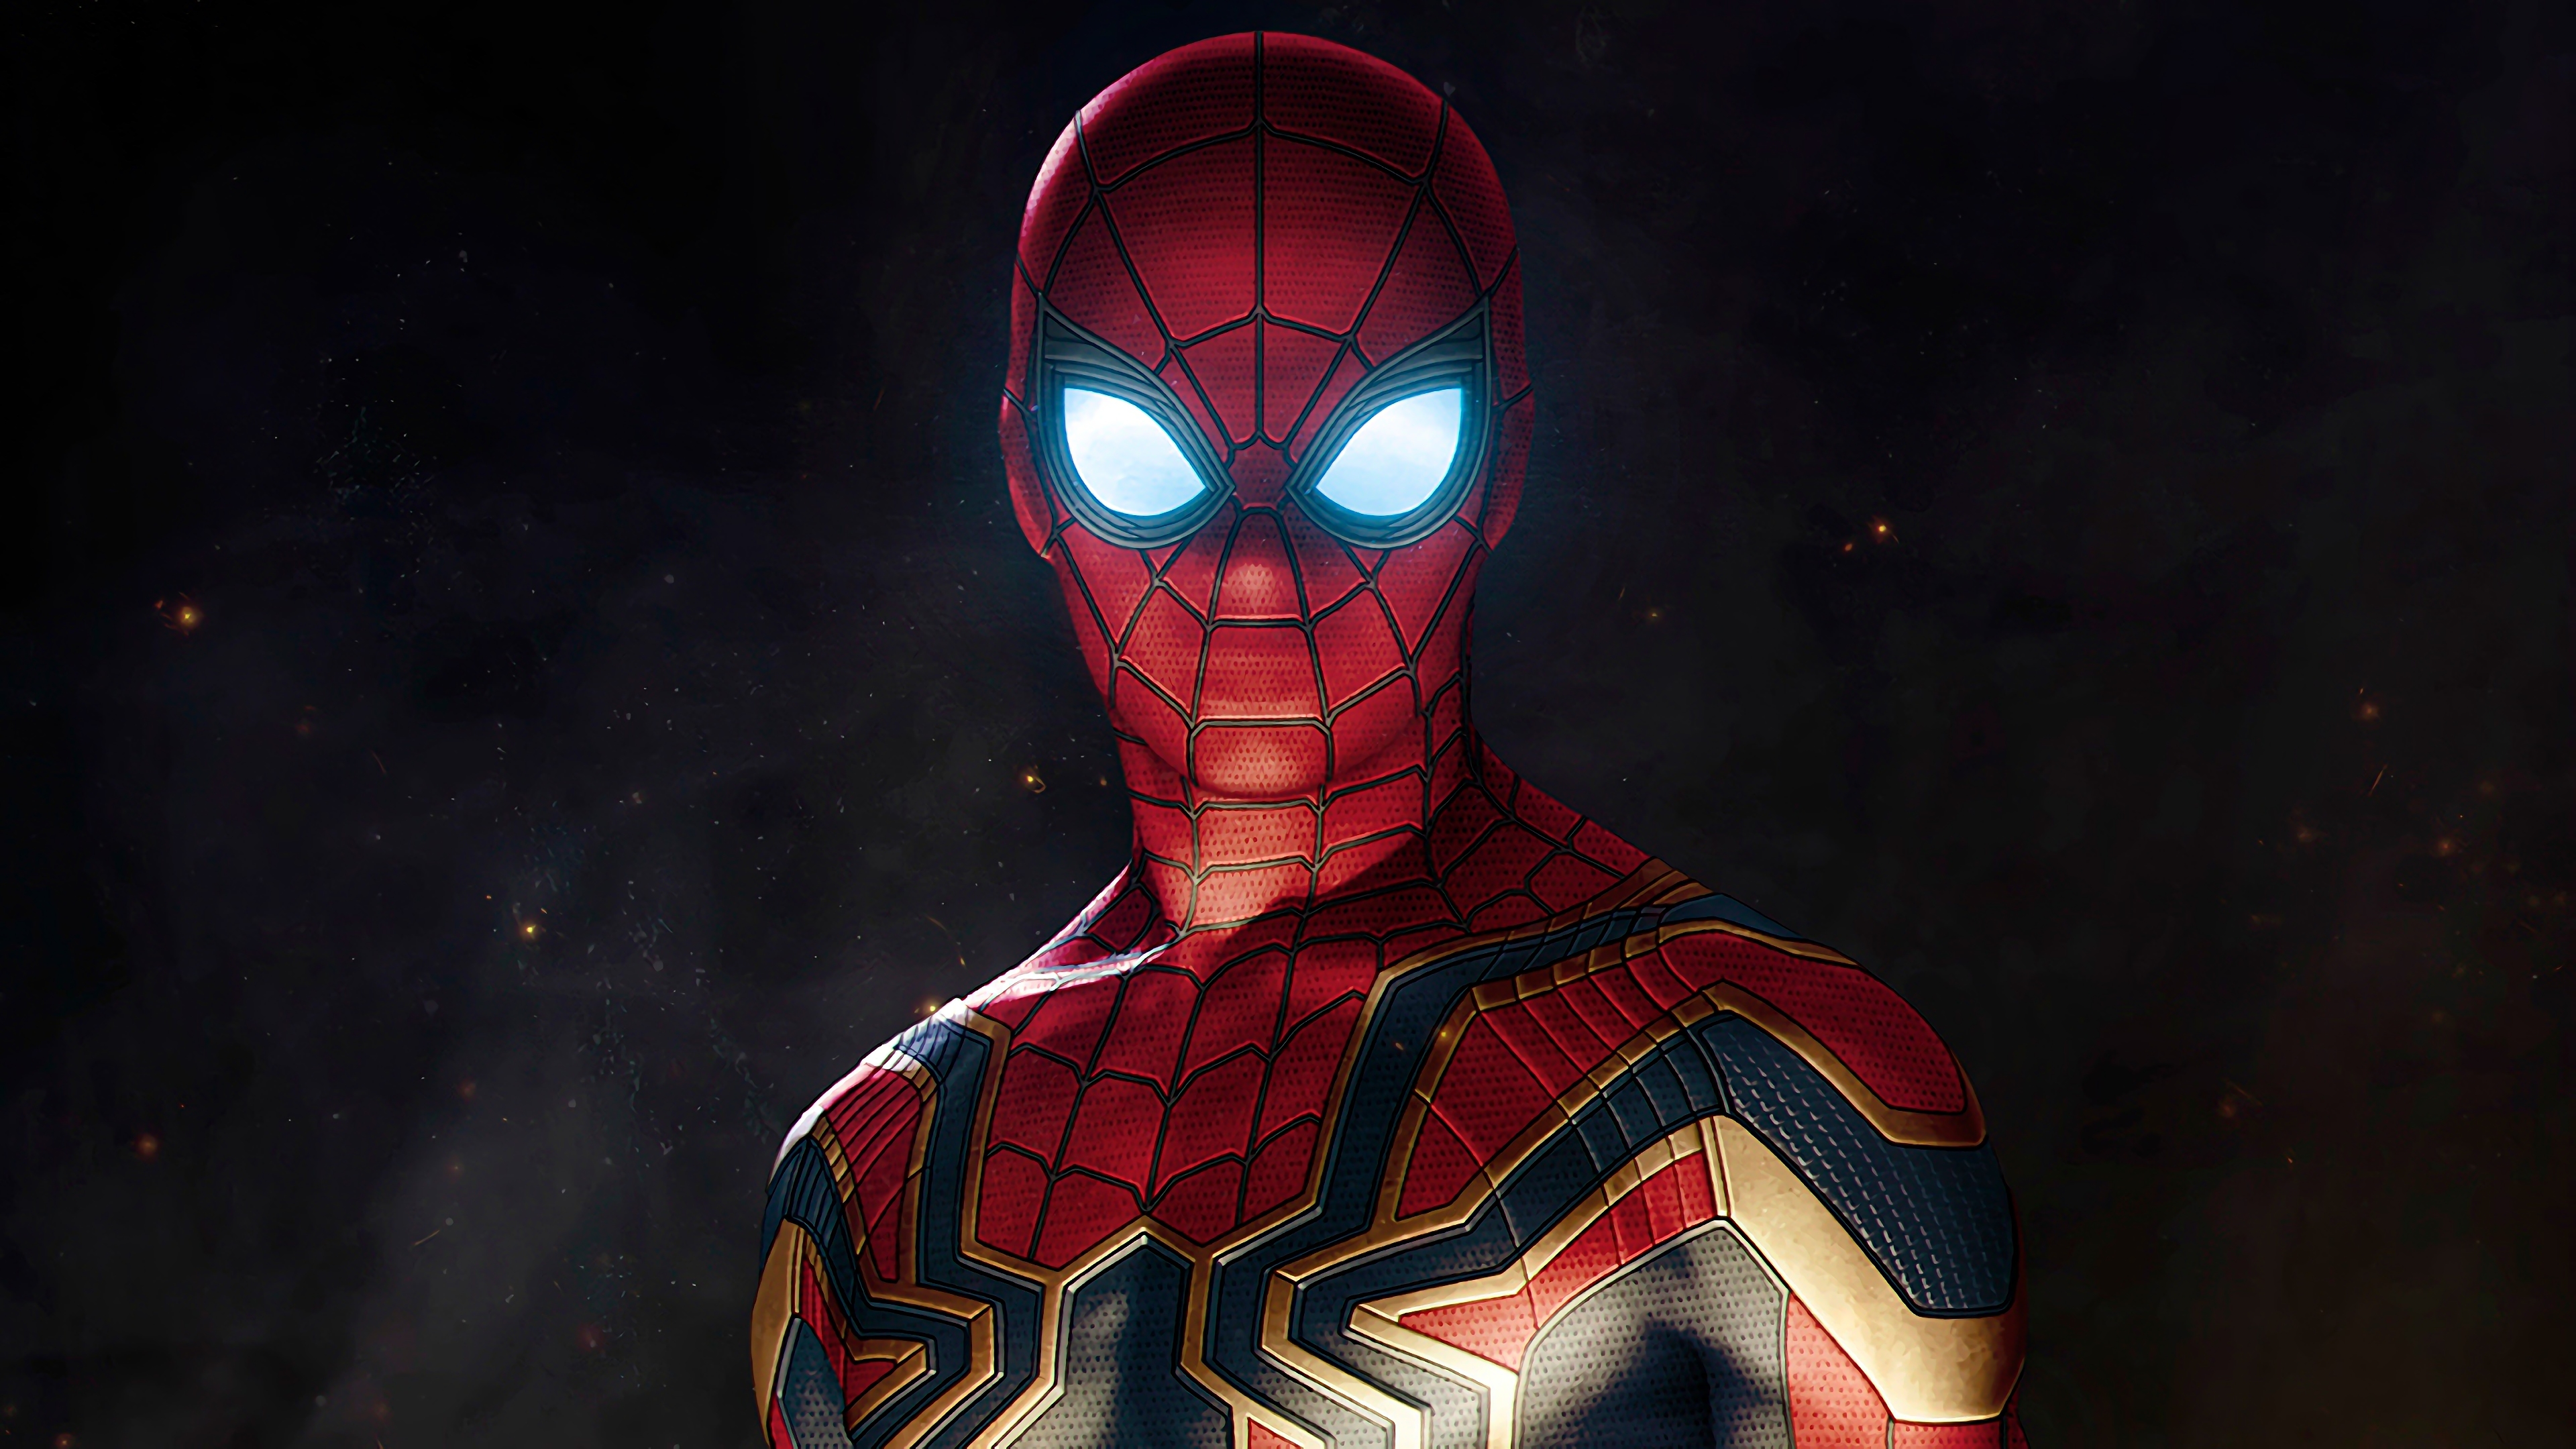 spider man, avengers: infinity war, movie, peter parker, glowing eyes, the avengers lock screen backgrounds